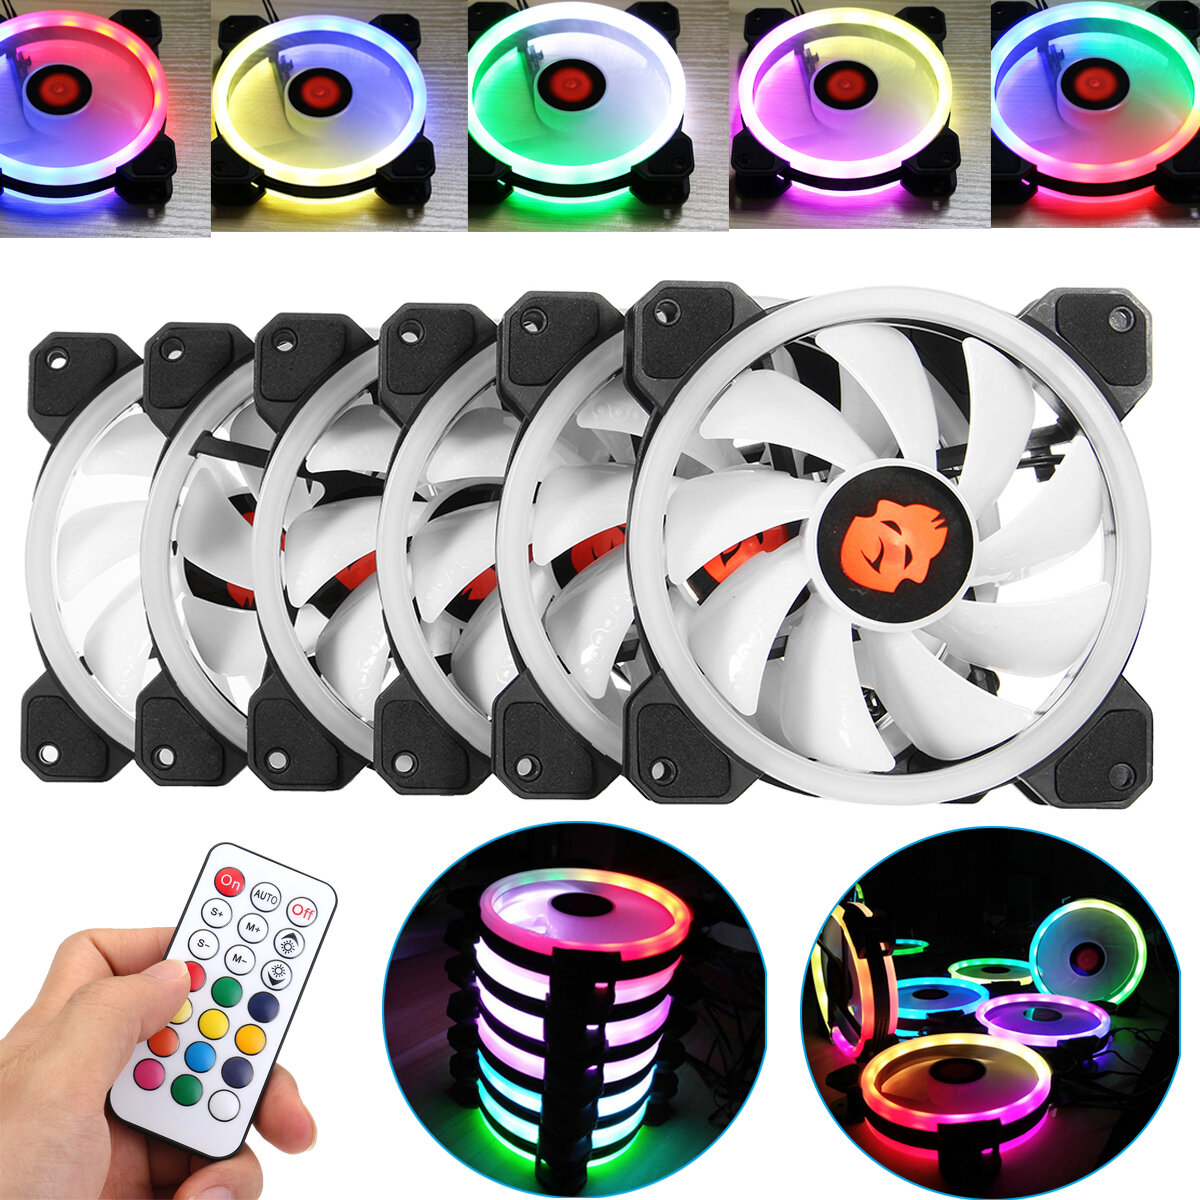 best price,coolmoon,6pcs,120mm,adjustable,rgb,led,computer,cooling,fan,eu,discount